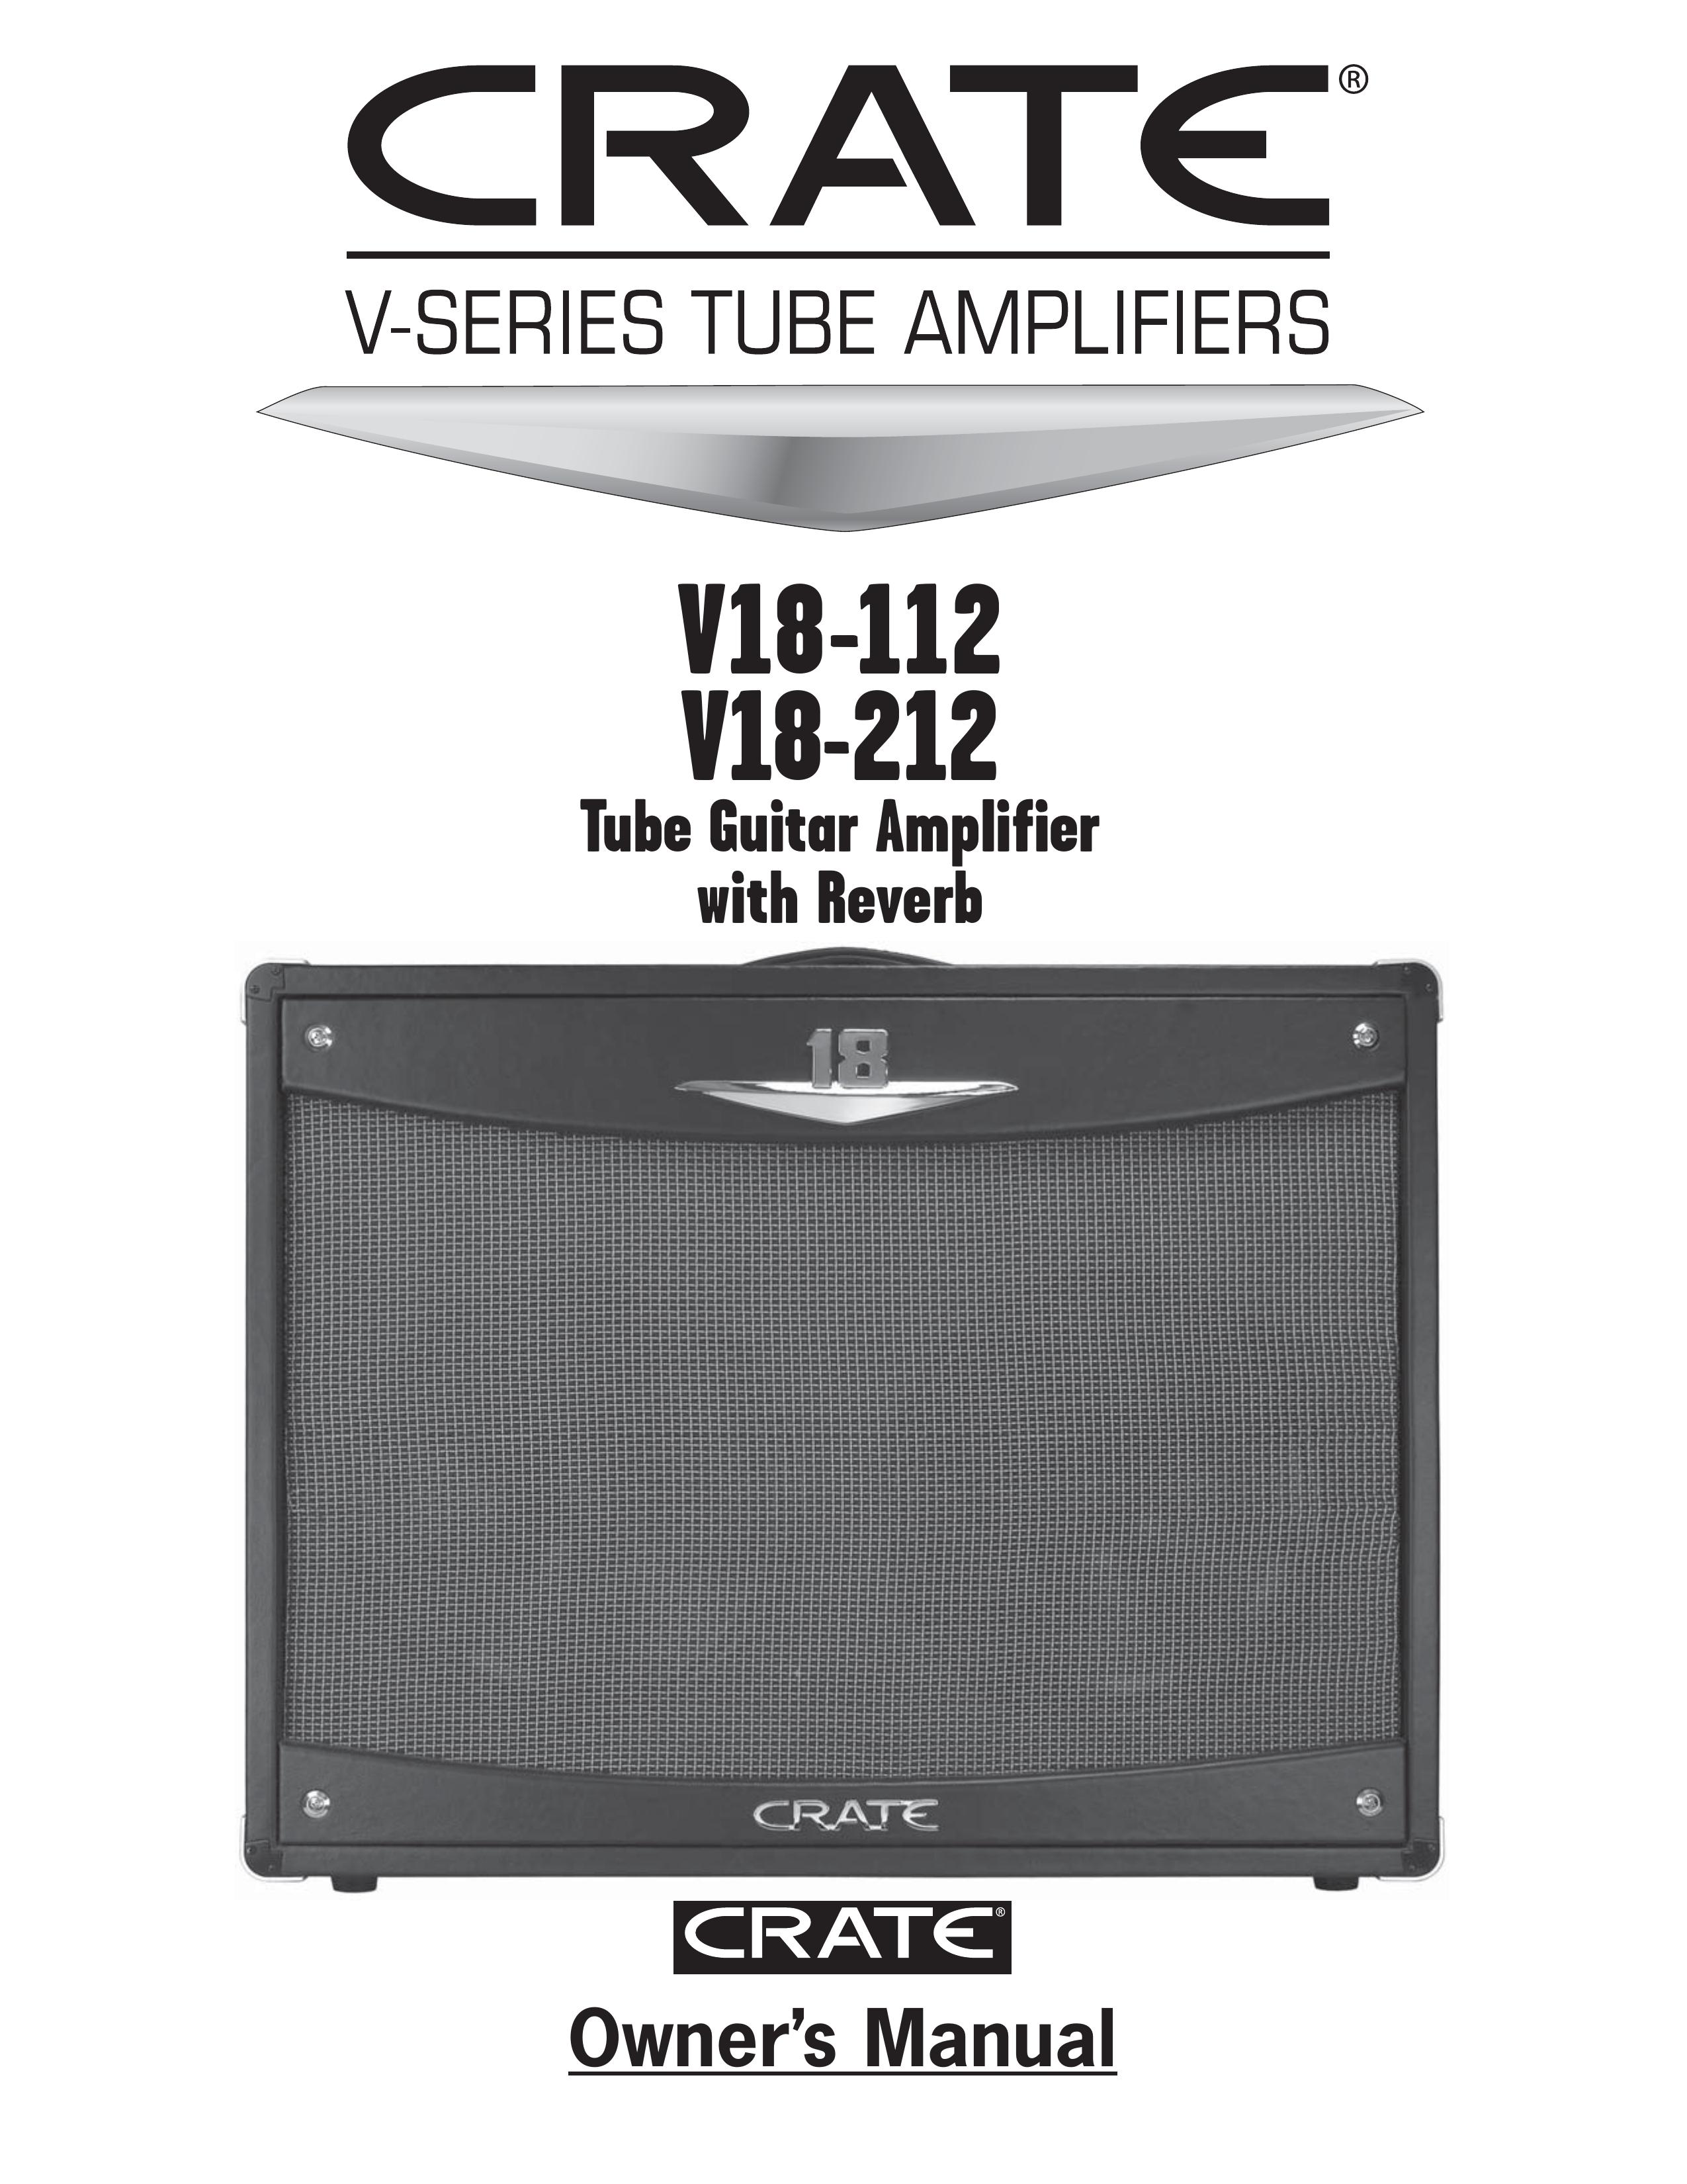 Crate Amplifiers V18-212 Musical Instrument User Manual